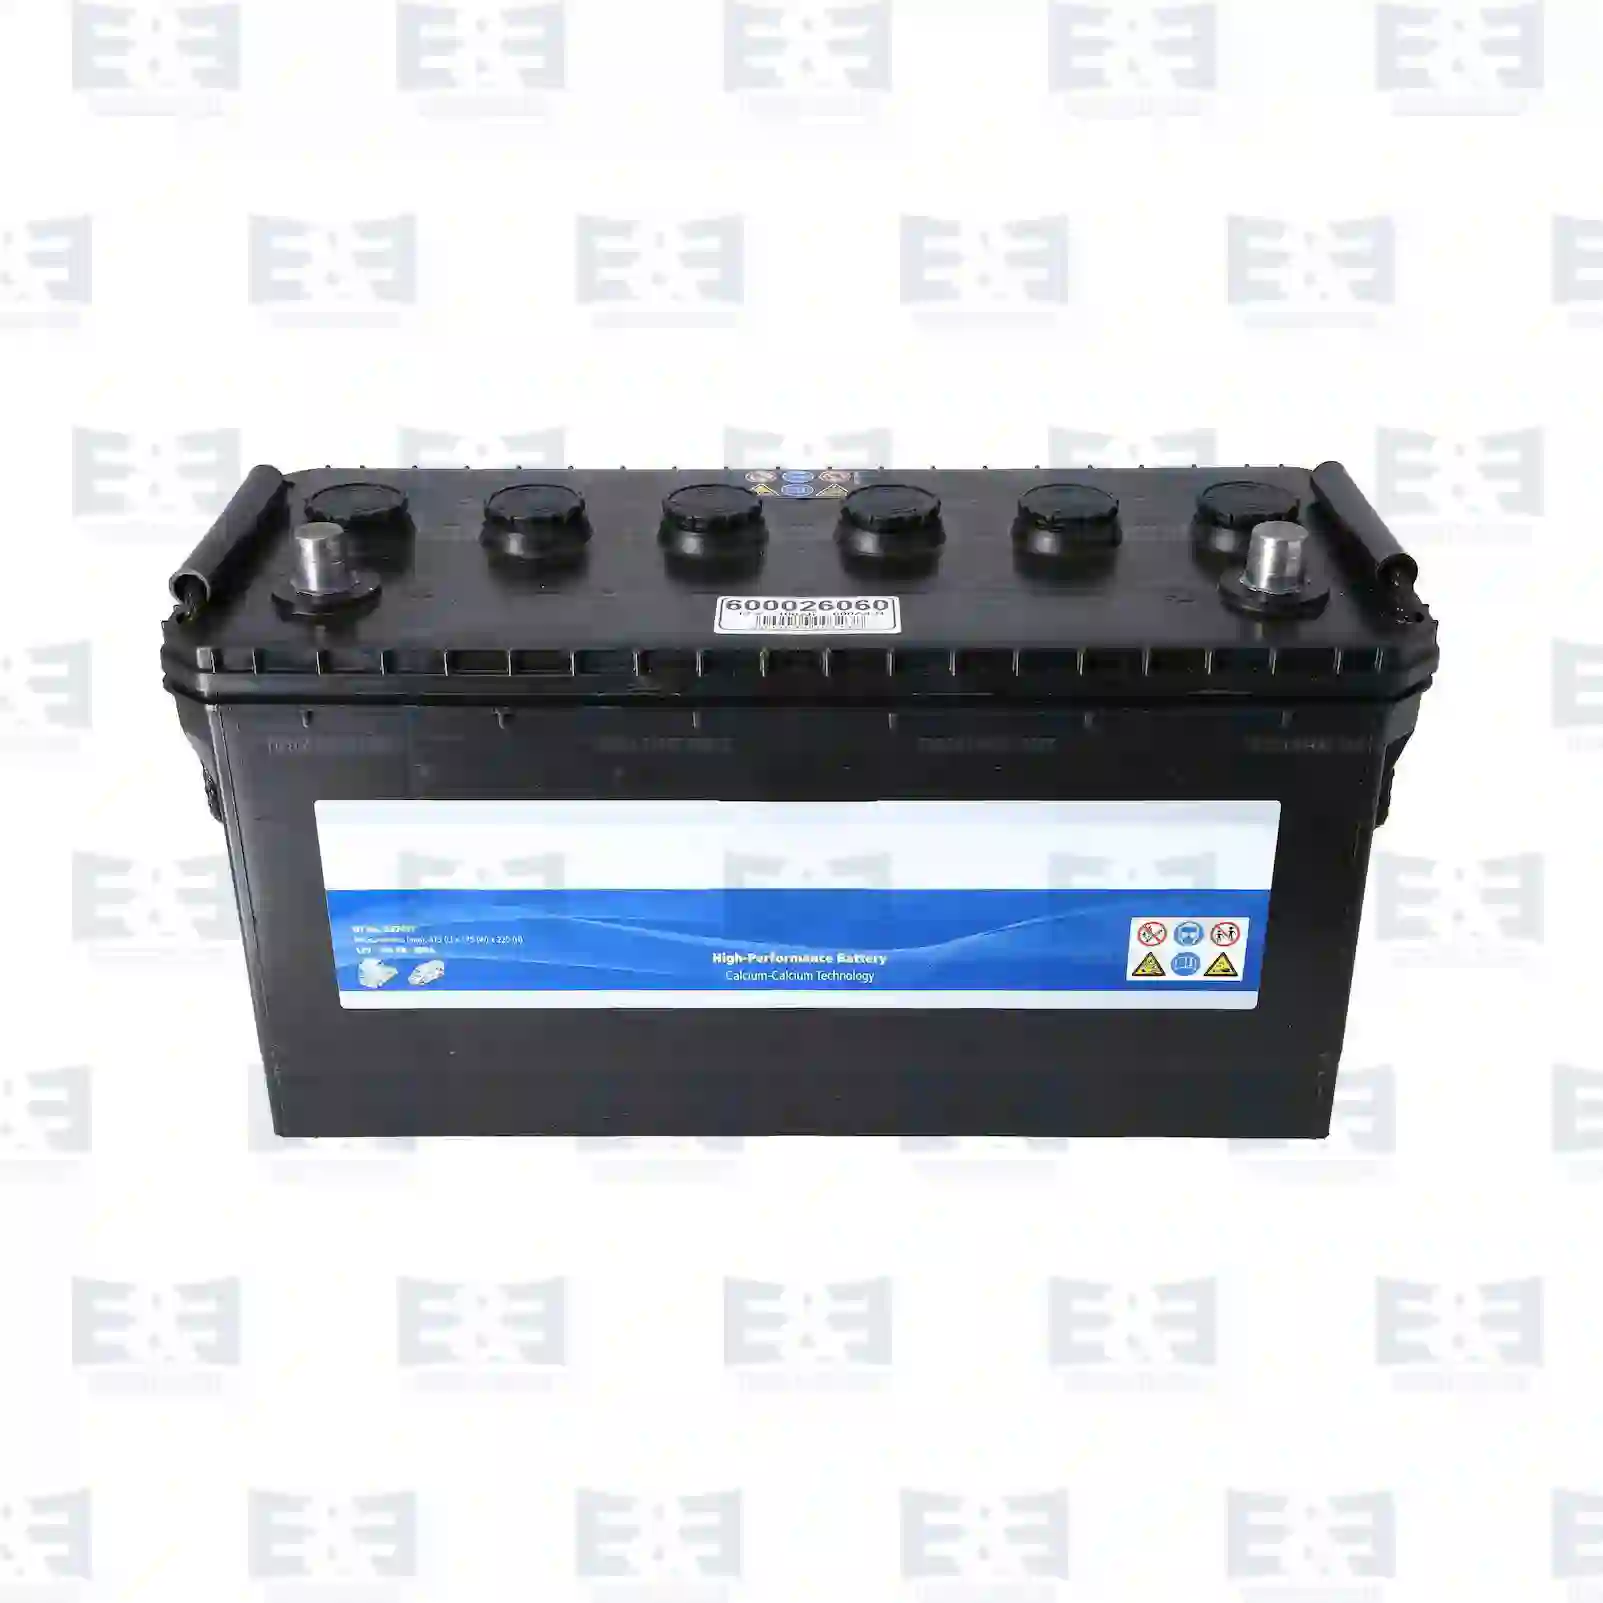 Battery Starter battery, EE No 2E2290459 ,  oem no:0005418301, 0005418601, 0015411201, 0025412701, 0025412801, 0025412901, 0025419201, 0025419601, 0035410001, 3355400001, 3355400101, 1602109 E&E Truck Spare Parts | Truck Spare Parts, Auotomotive Spare Parts